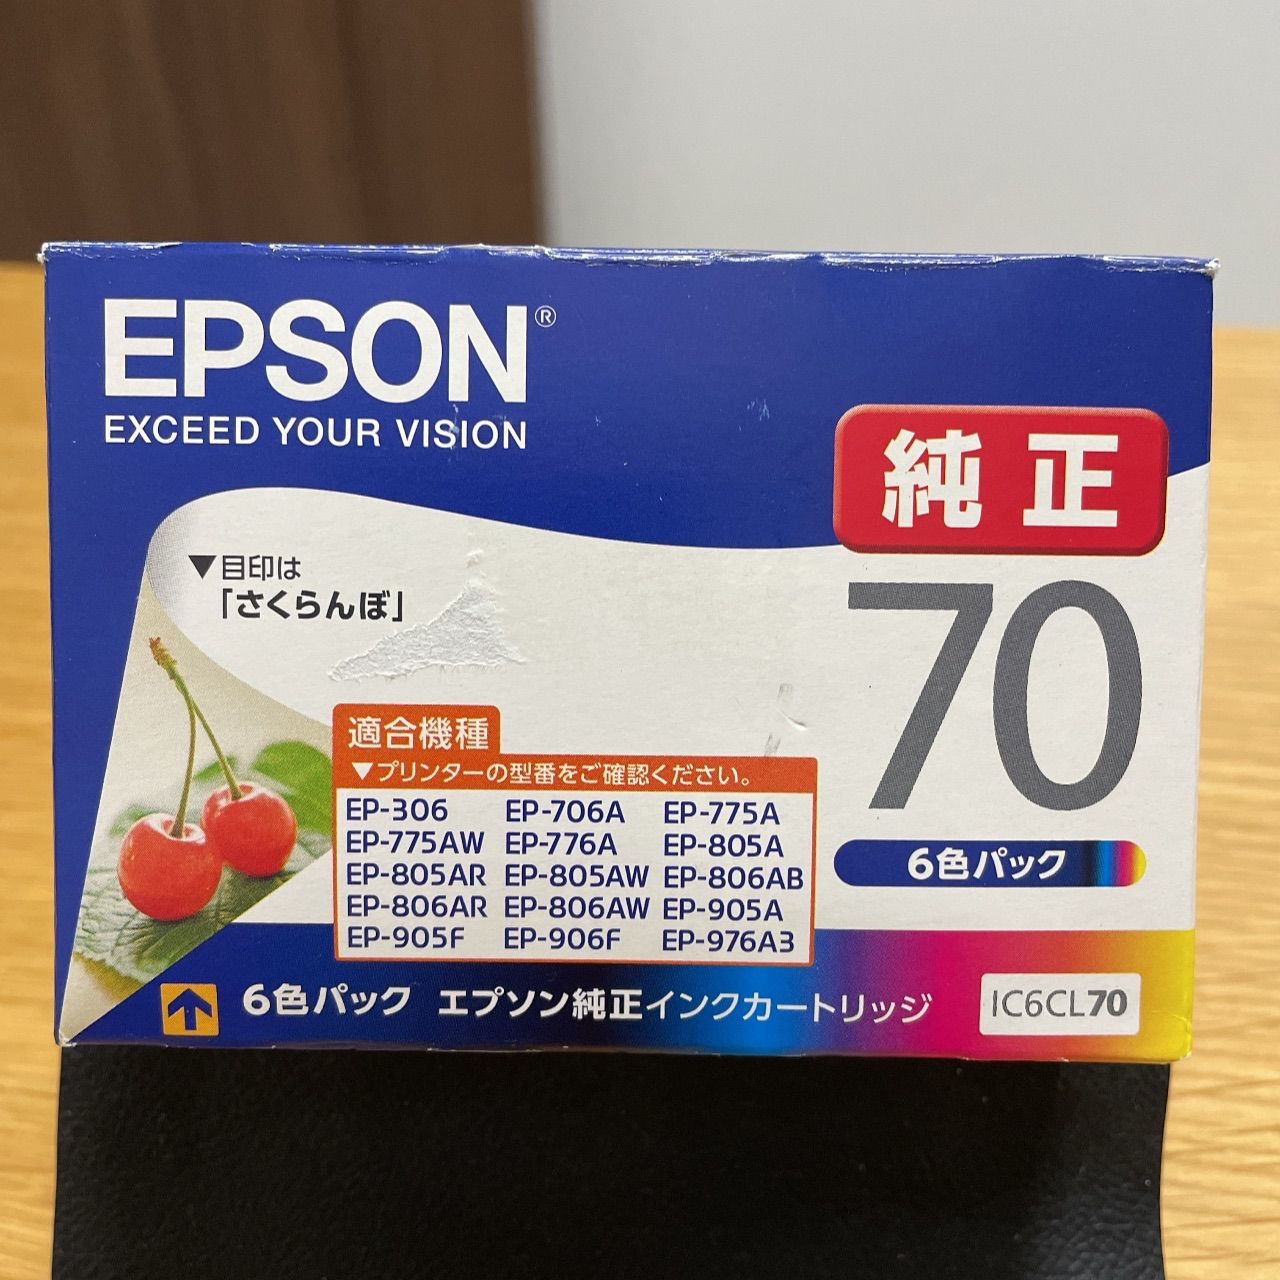 EPSON プリンター ep706-A EPSON 純正インク70L セット